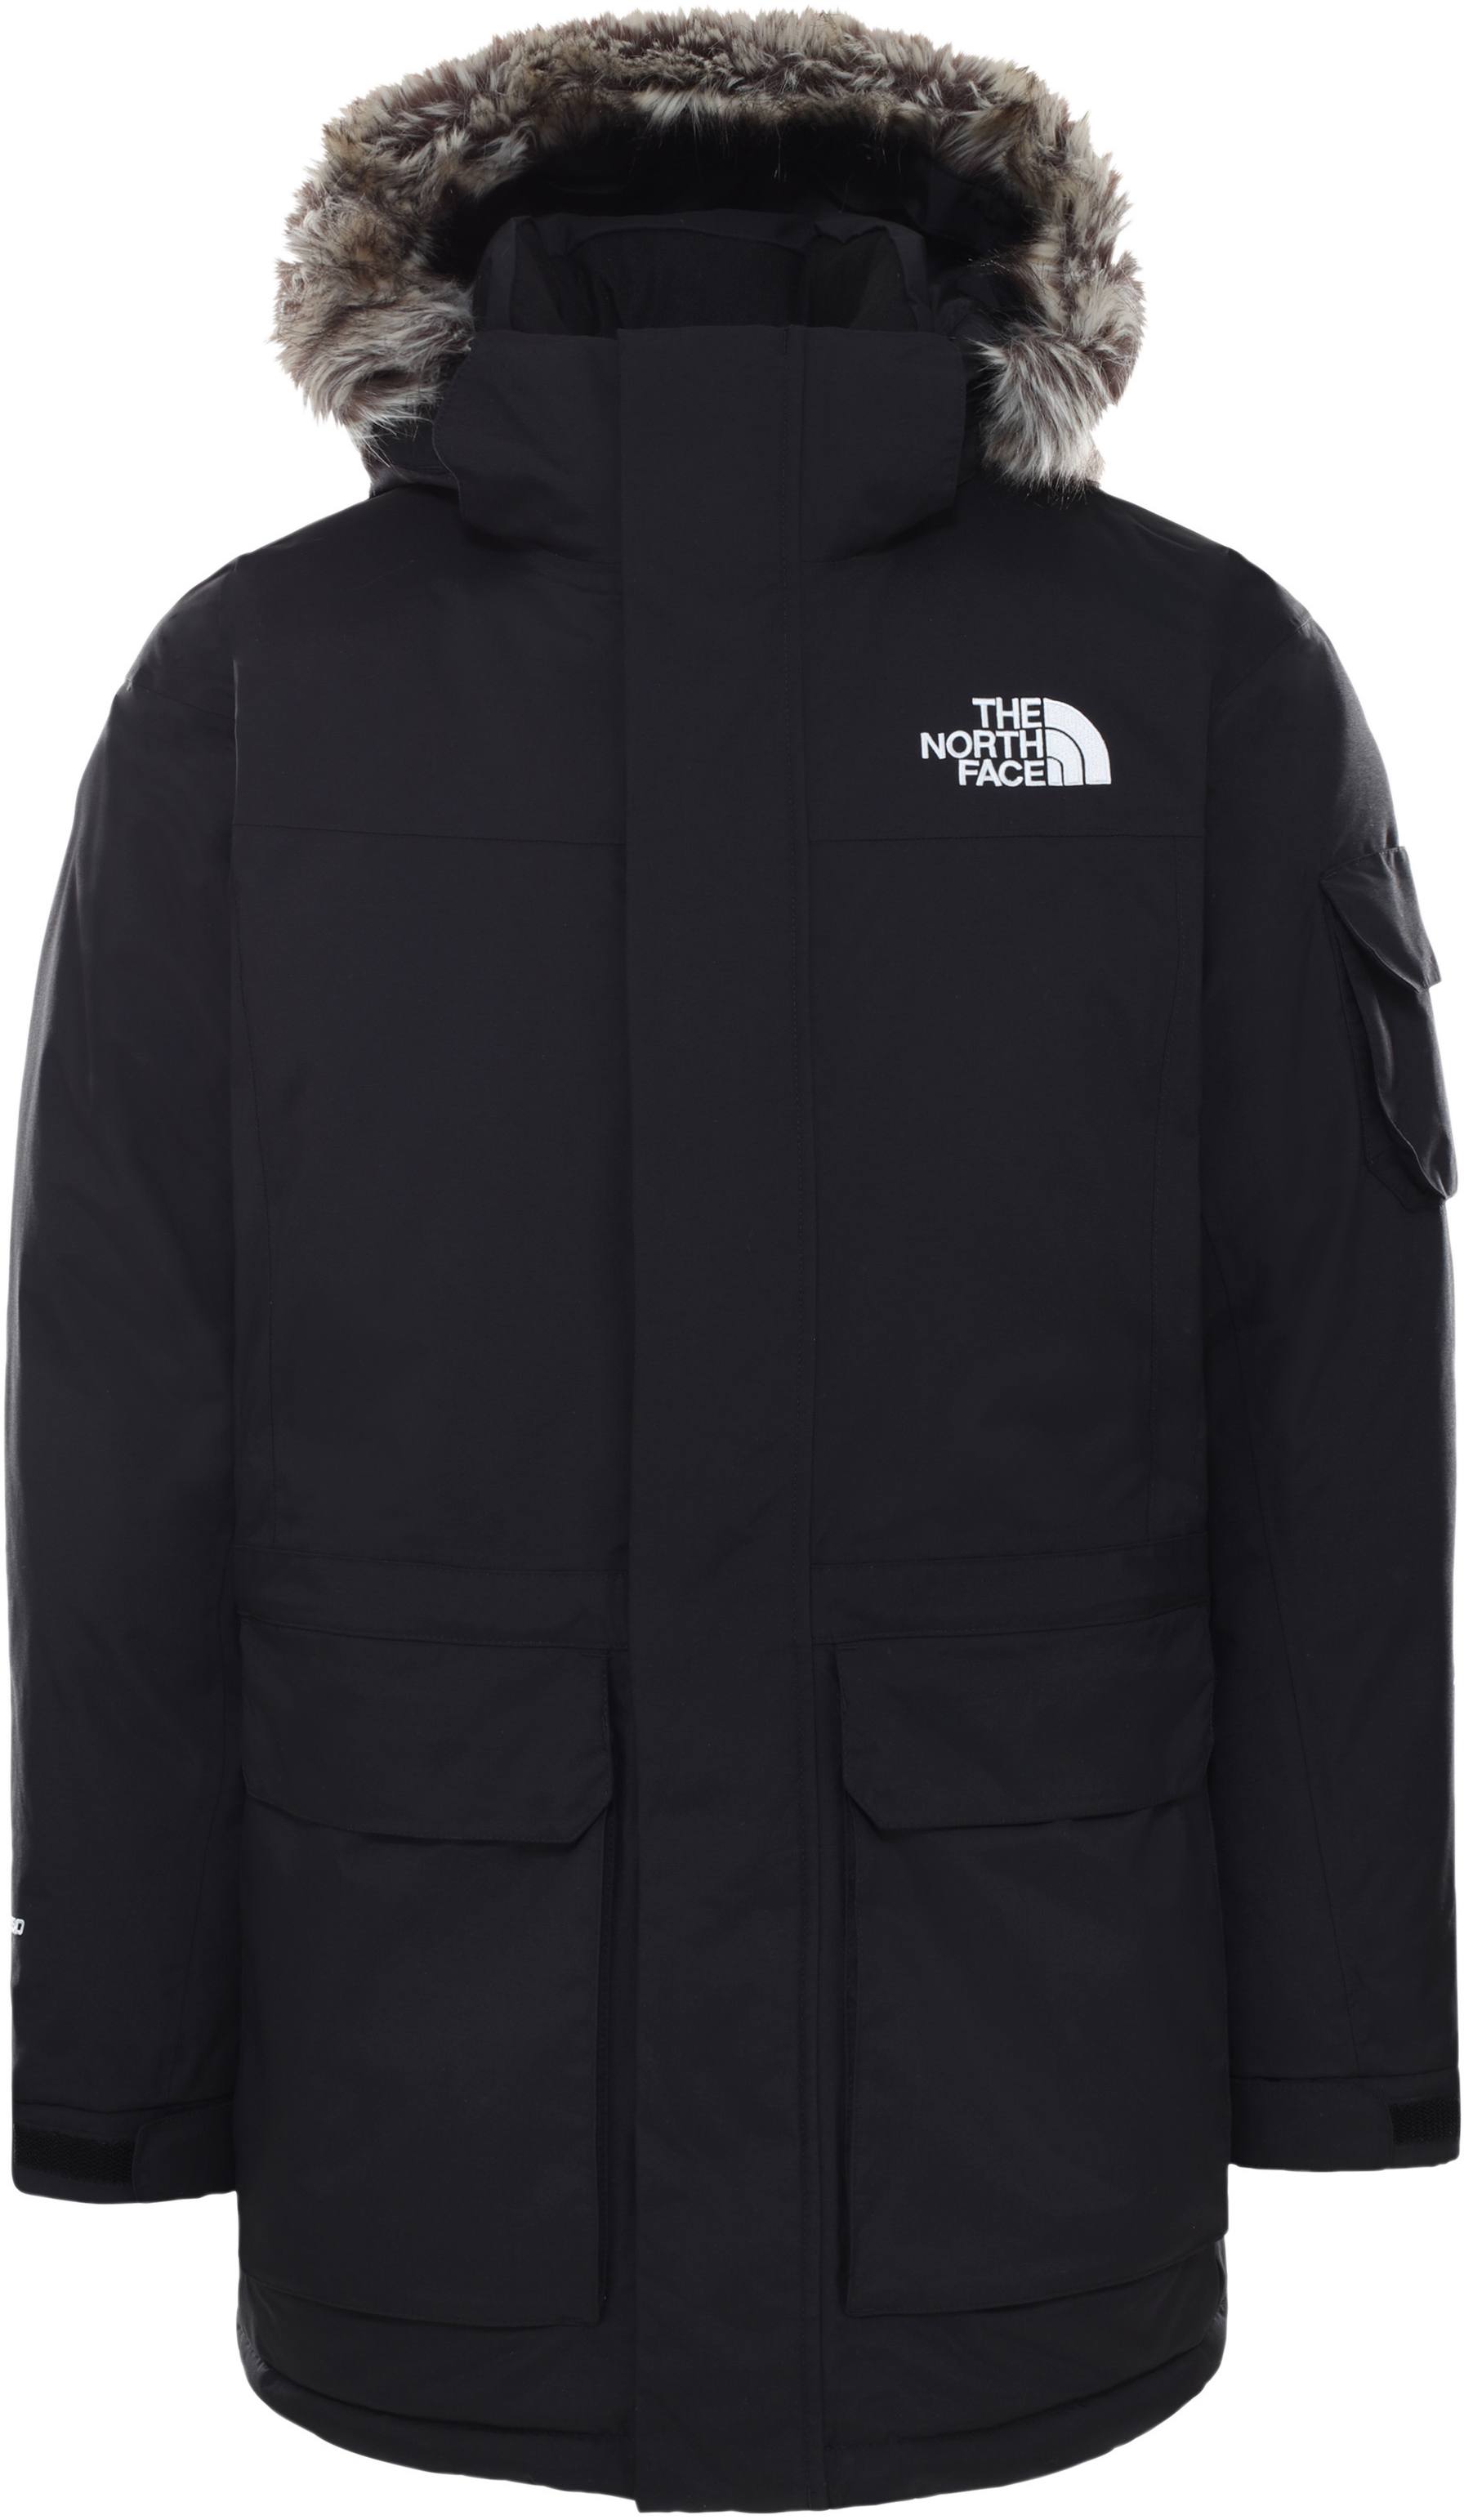 The North Face Recycled McMurdo Jacket Black M